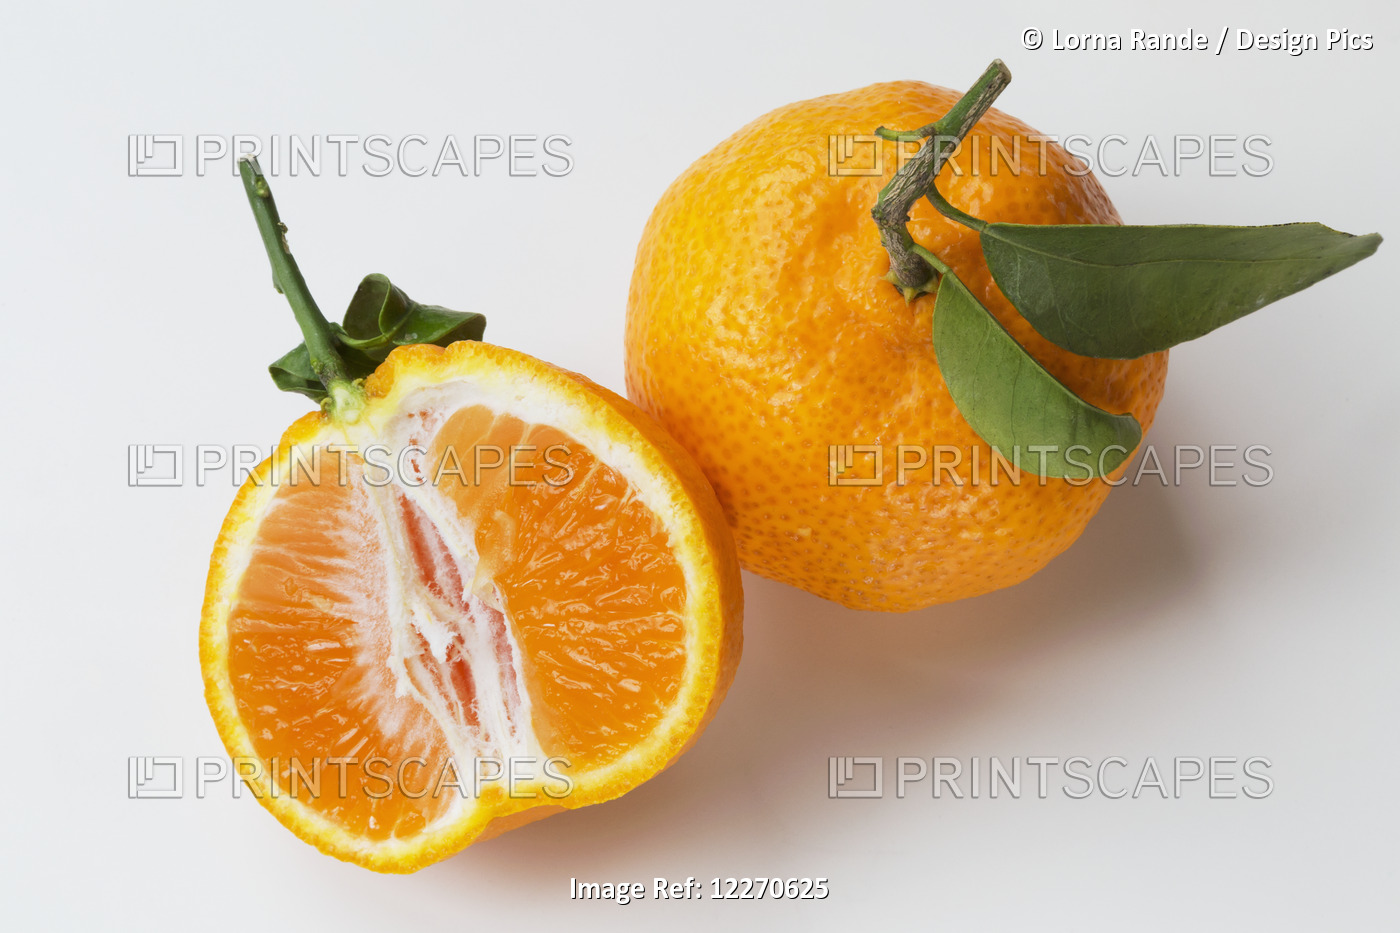 Oranges With Leaves On The Stem; Chilliwack, British Columbia, Canada